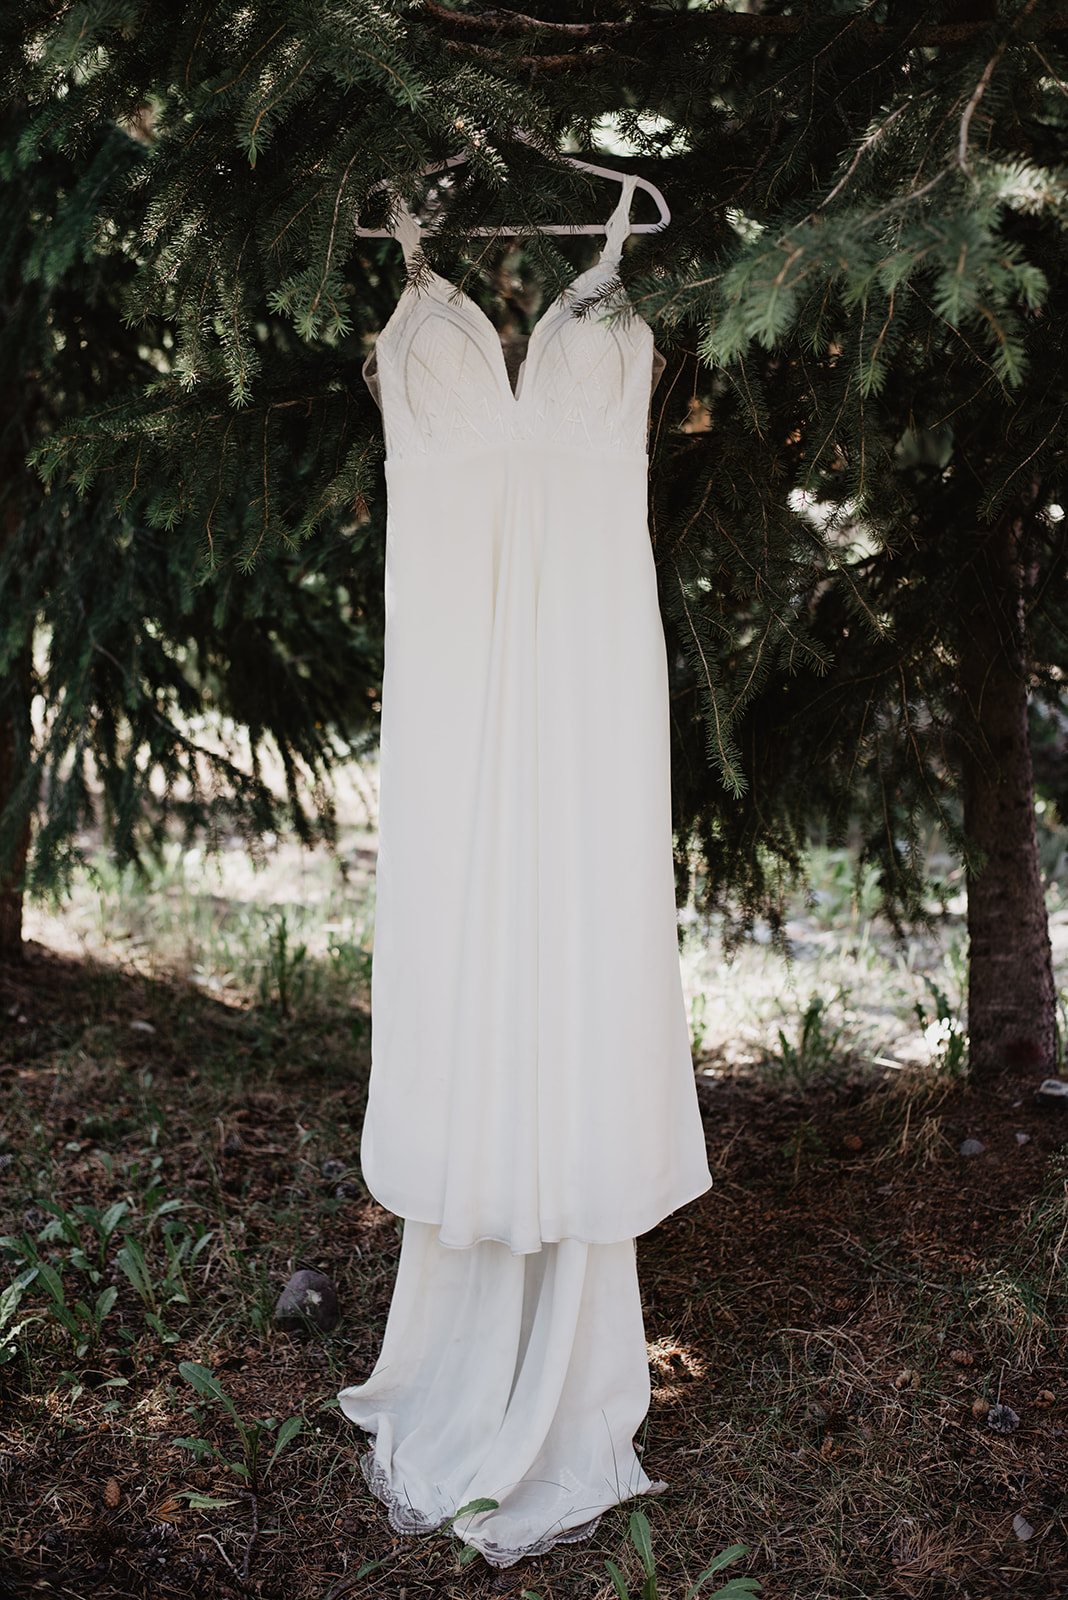 custom made wedding dress hanging from a tree in Jackson Hole for a detai lshot